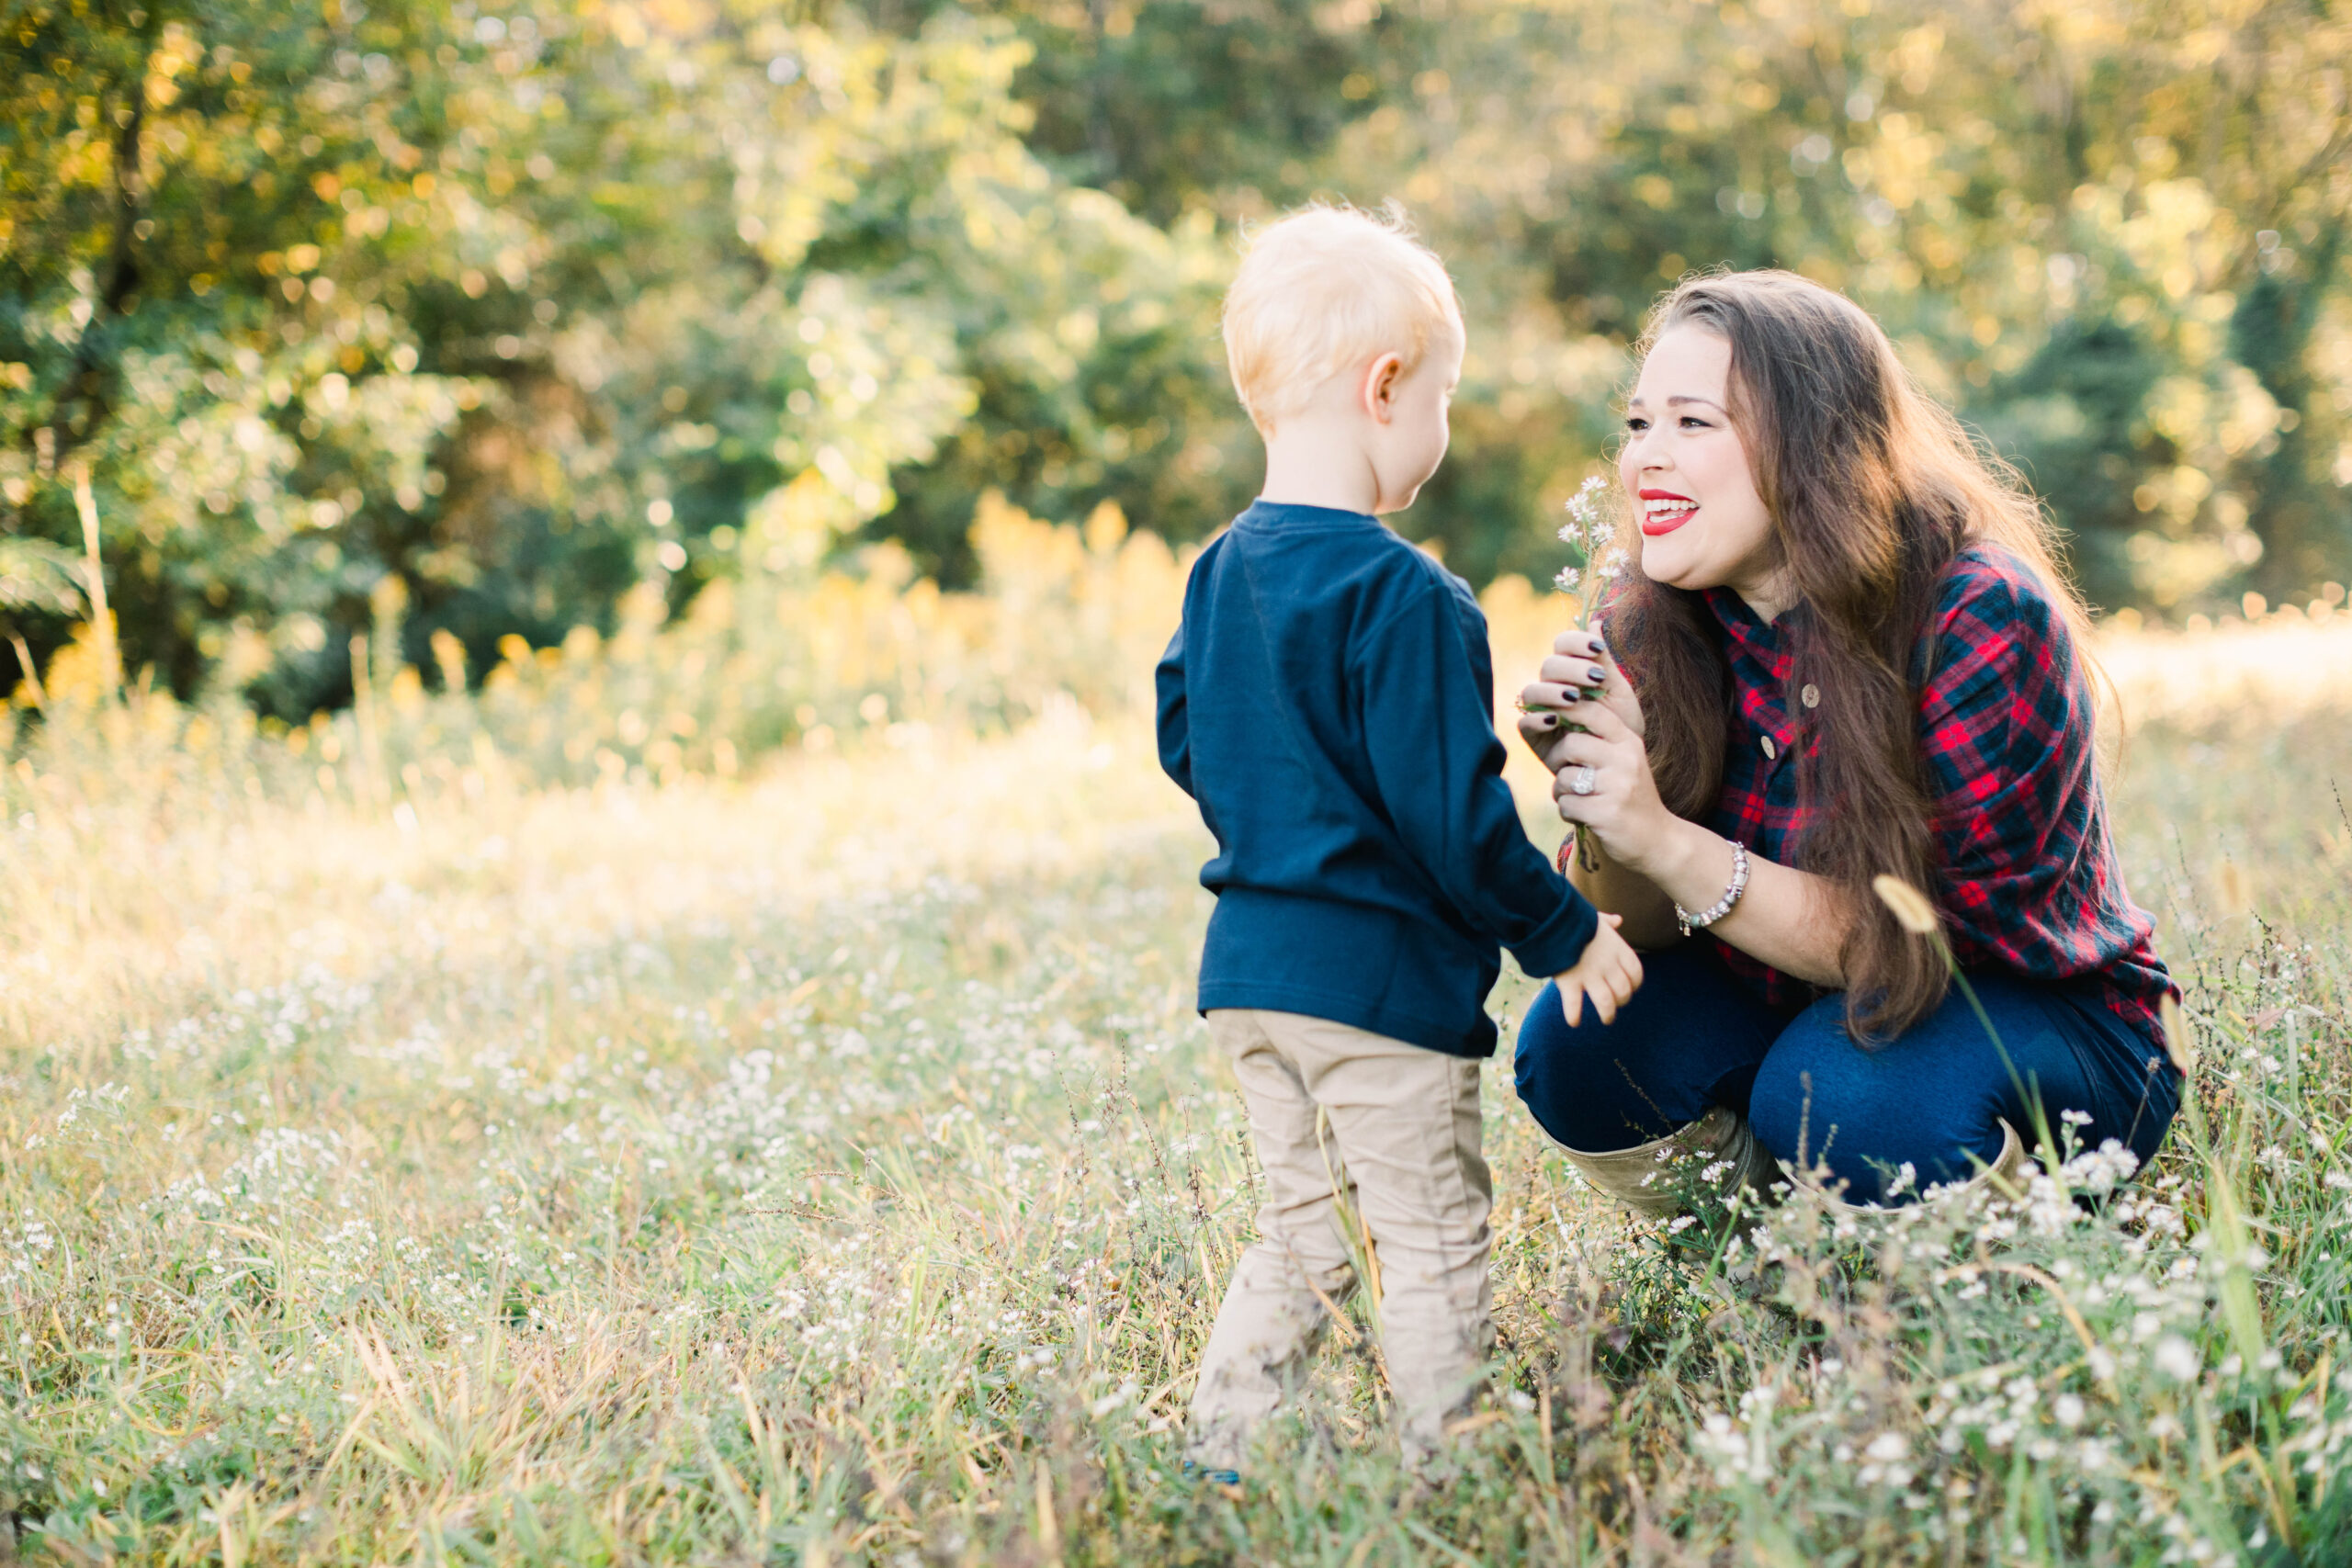 mom kneeled down with toddler in a field handing boy a flower